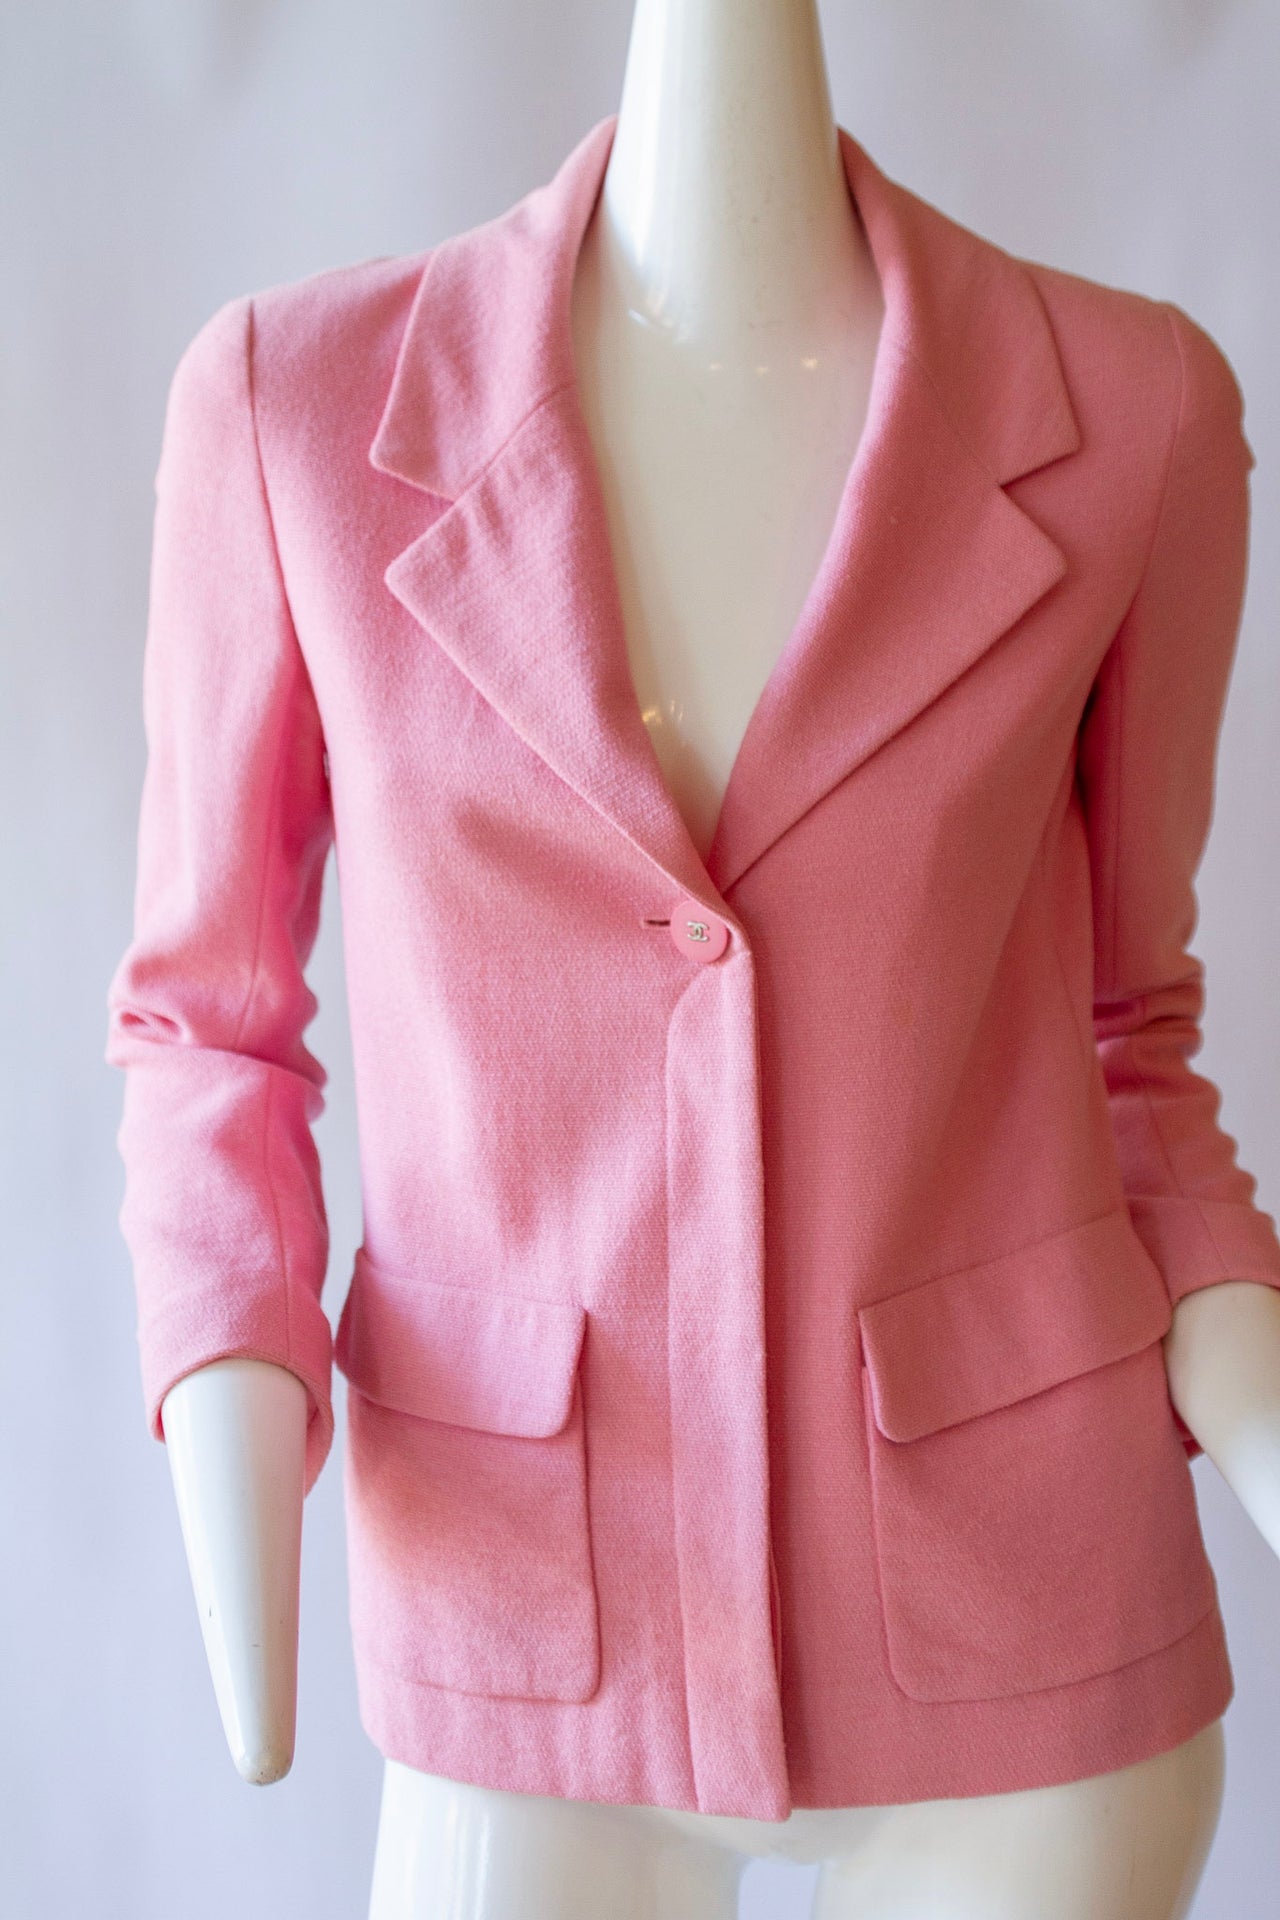 Chanel Boutique, pink blazer, personal collection of the Hollywood Golden Era, Actress Terry Moore